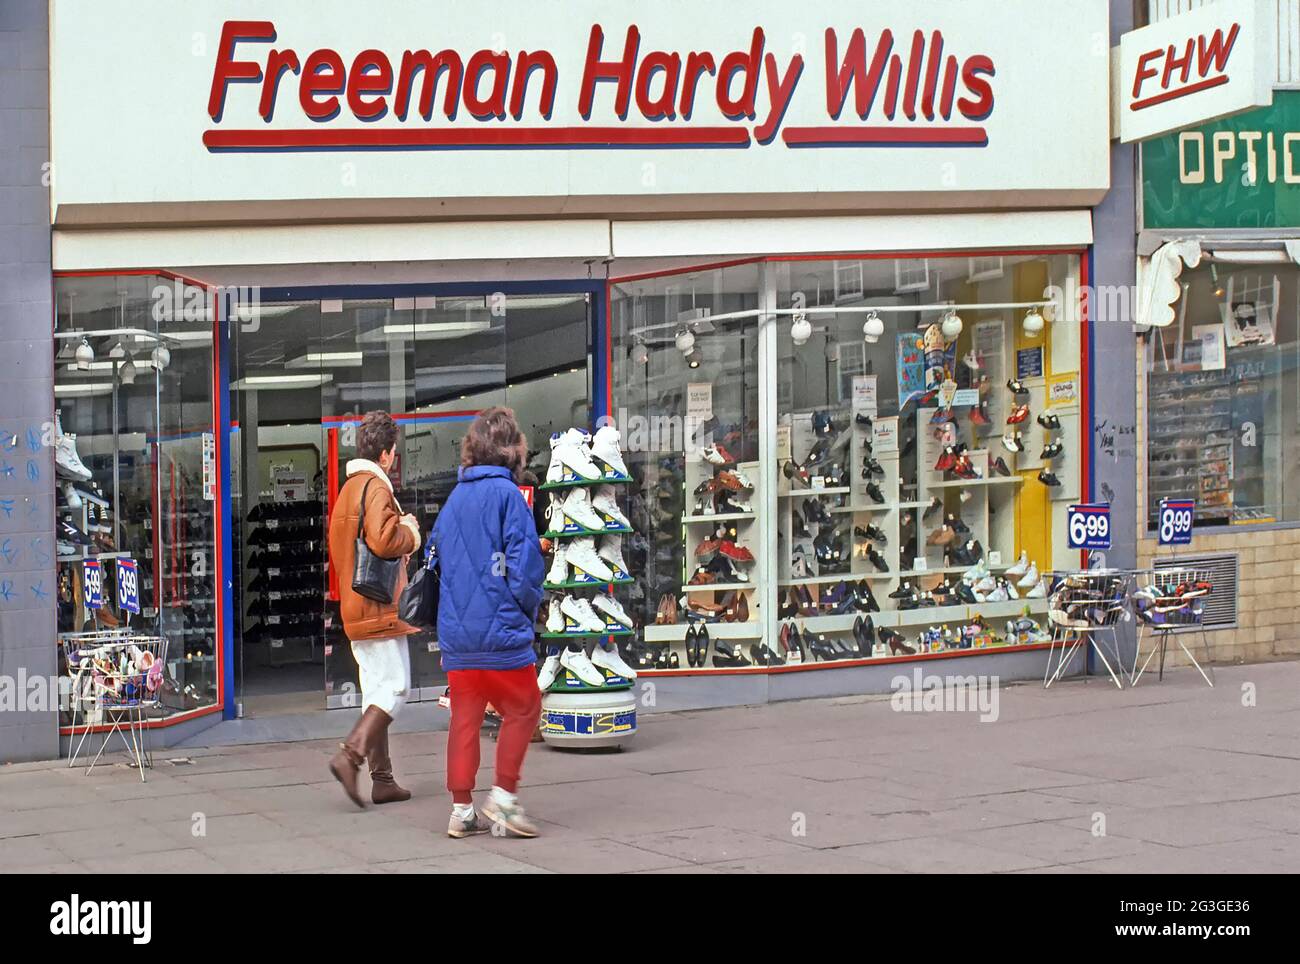 Freeman Hardy Willis FHW shoe store brand shop front window 1991 archive historical street scene view couple of women shoppers walking along shopping street pavement outside 1990s display of a retail footwear business in London Borough of Barking archival image of the way we were in 90s East End England UK Stock Photo